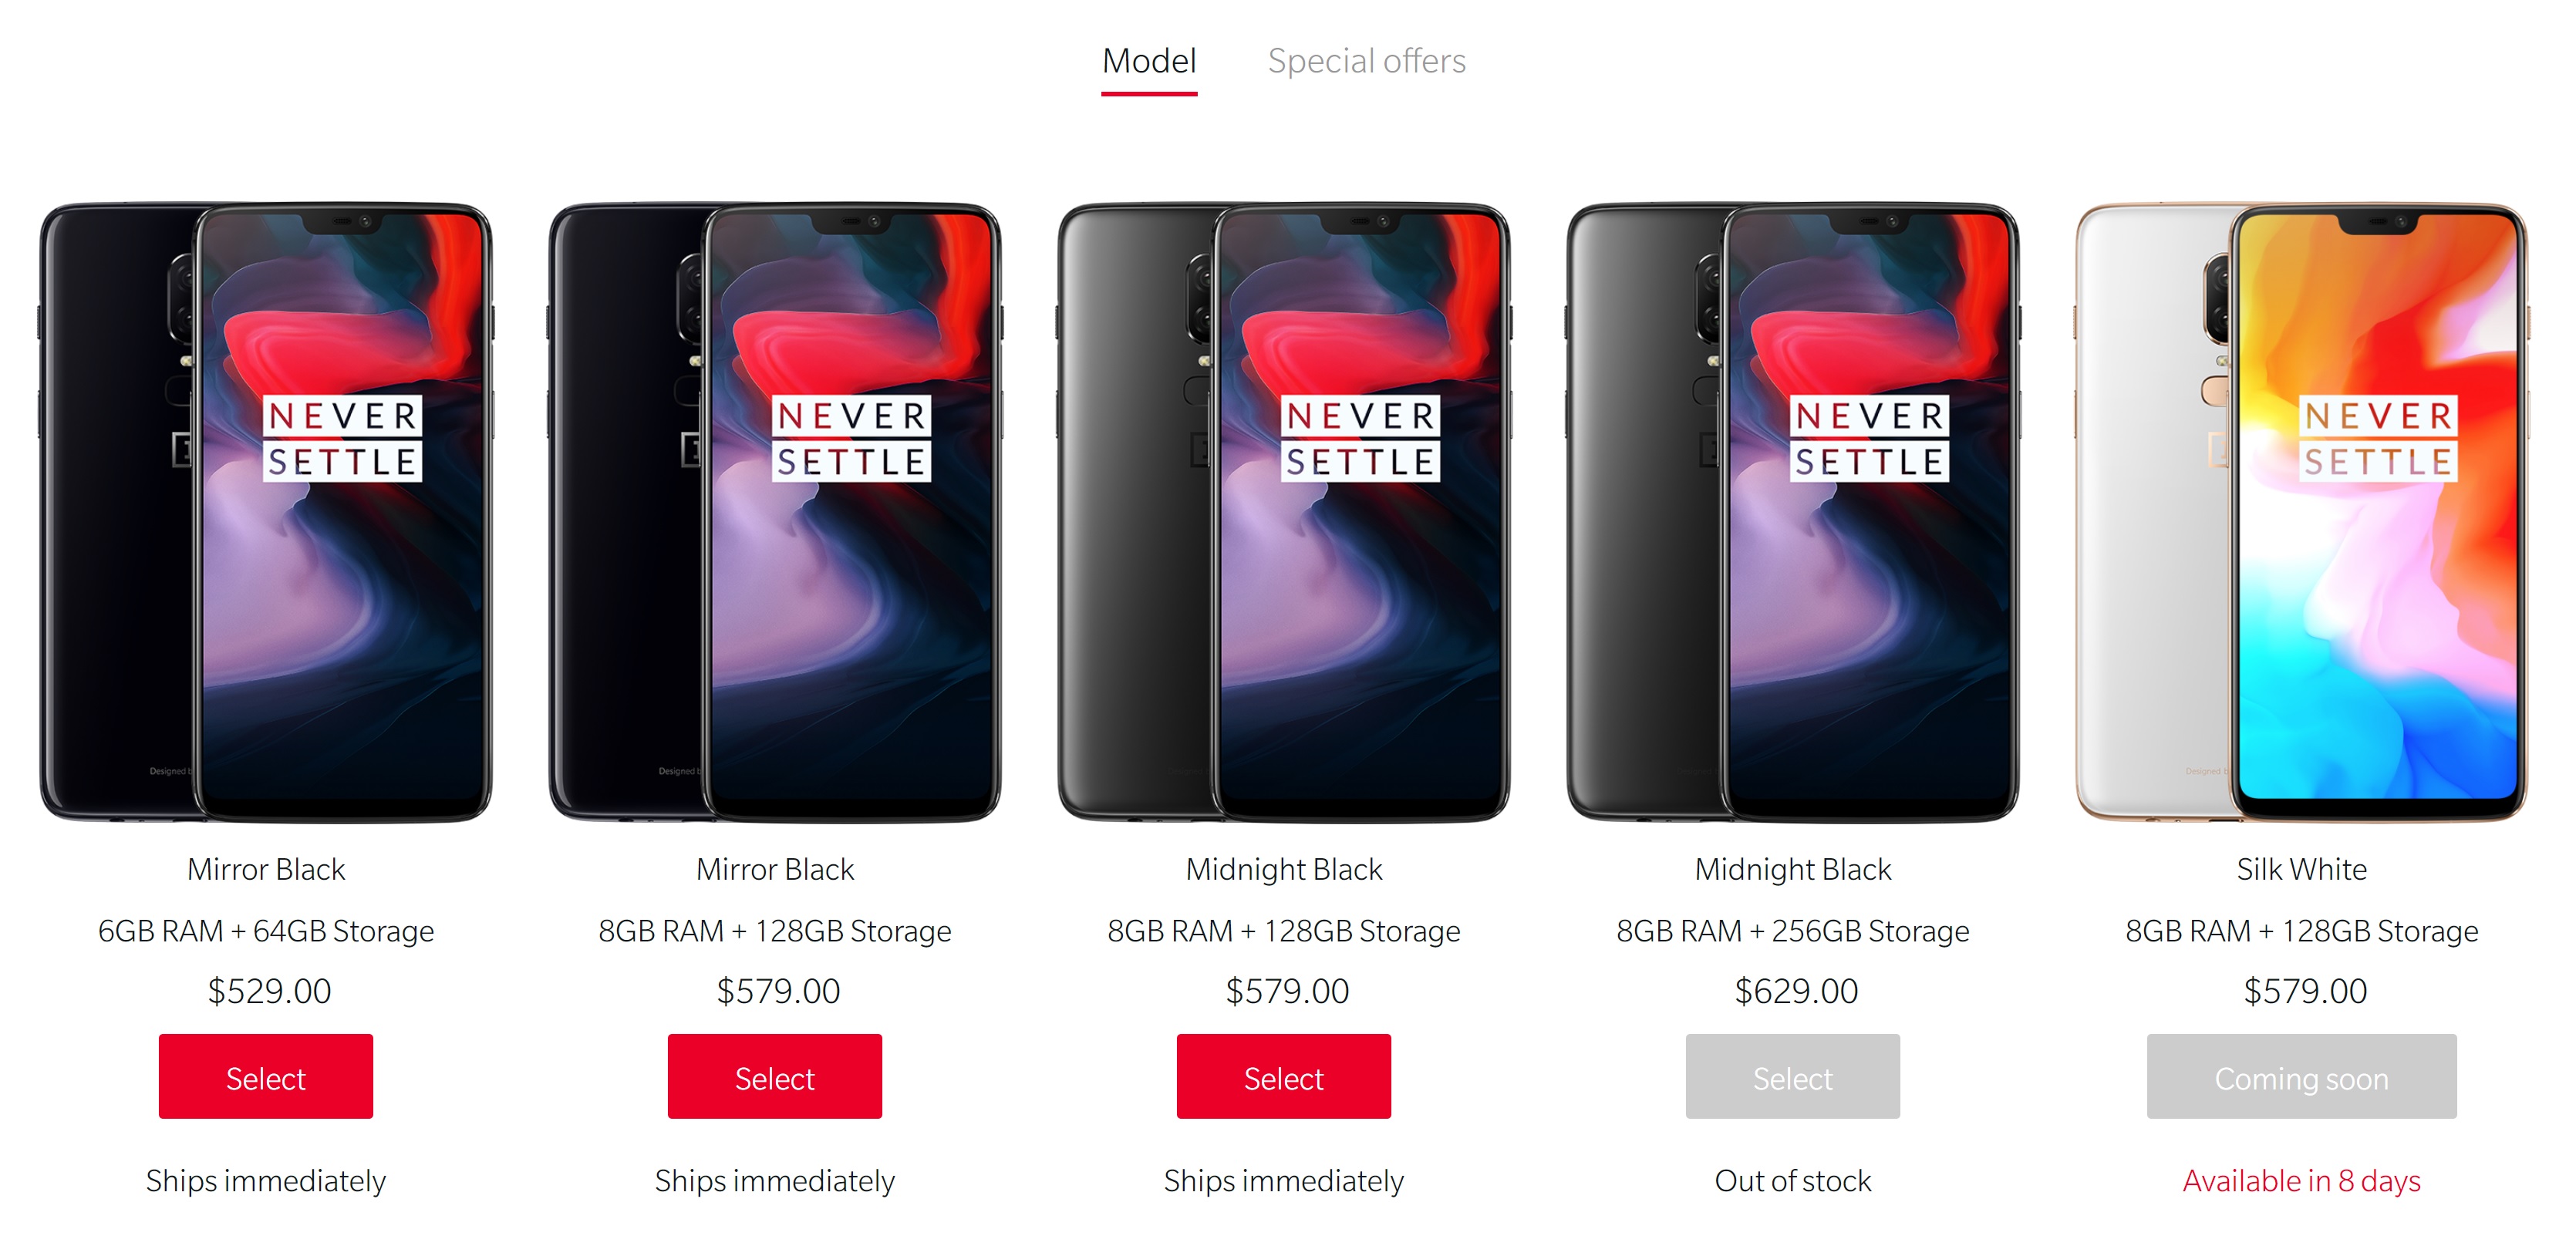 The OnePlus 6 smartphones and their storage amounts and prices from the official OnePlus website.